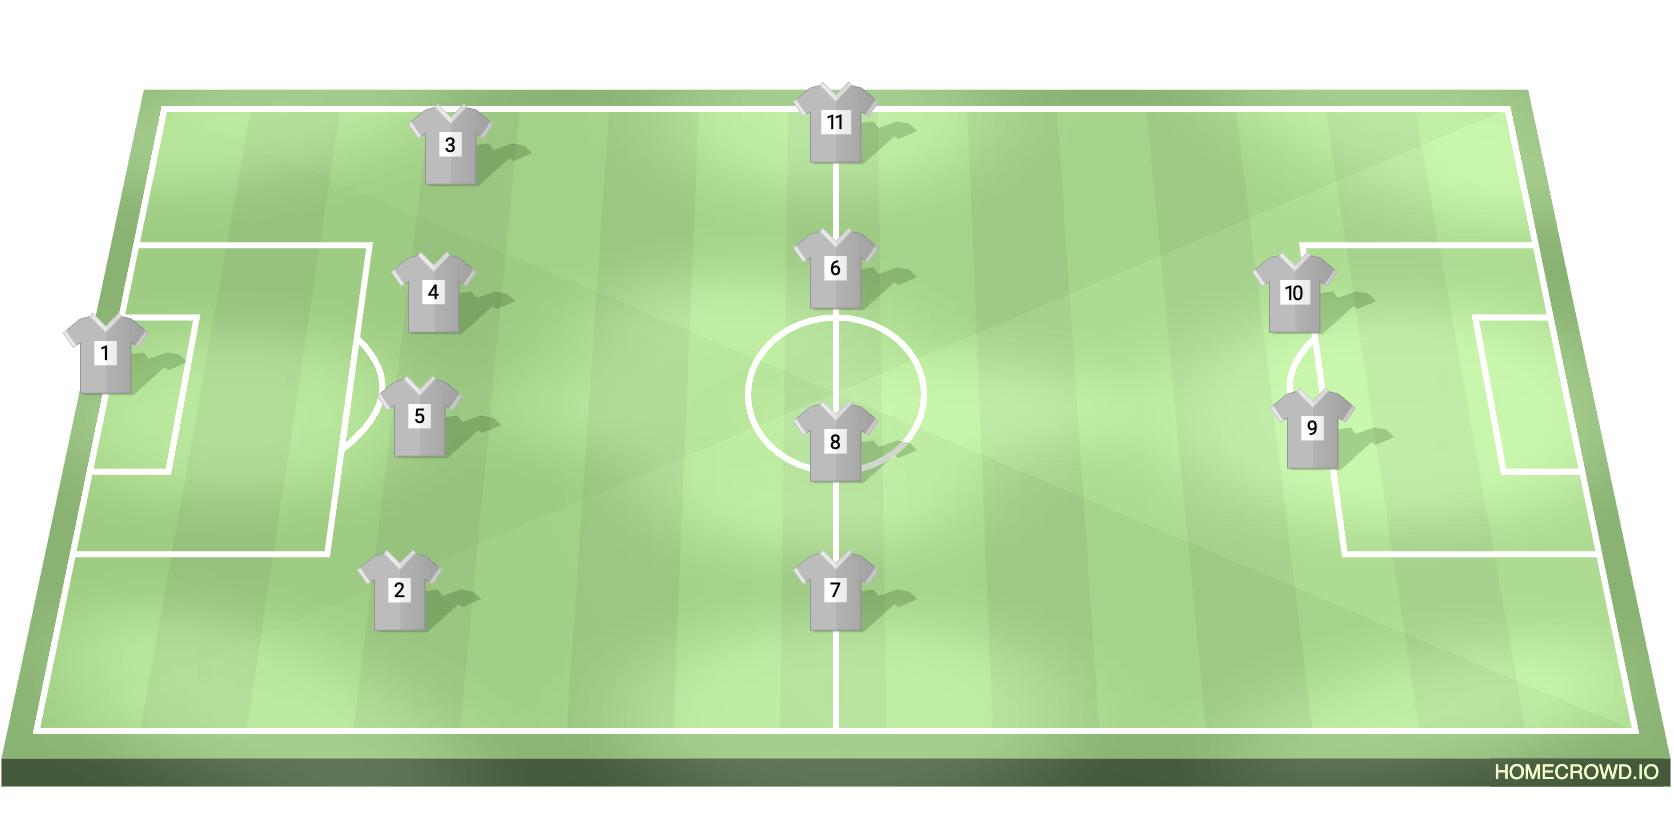 The 4-4-2 formation.